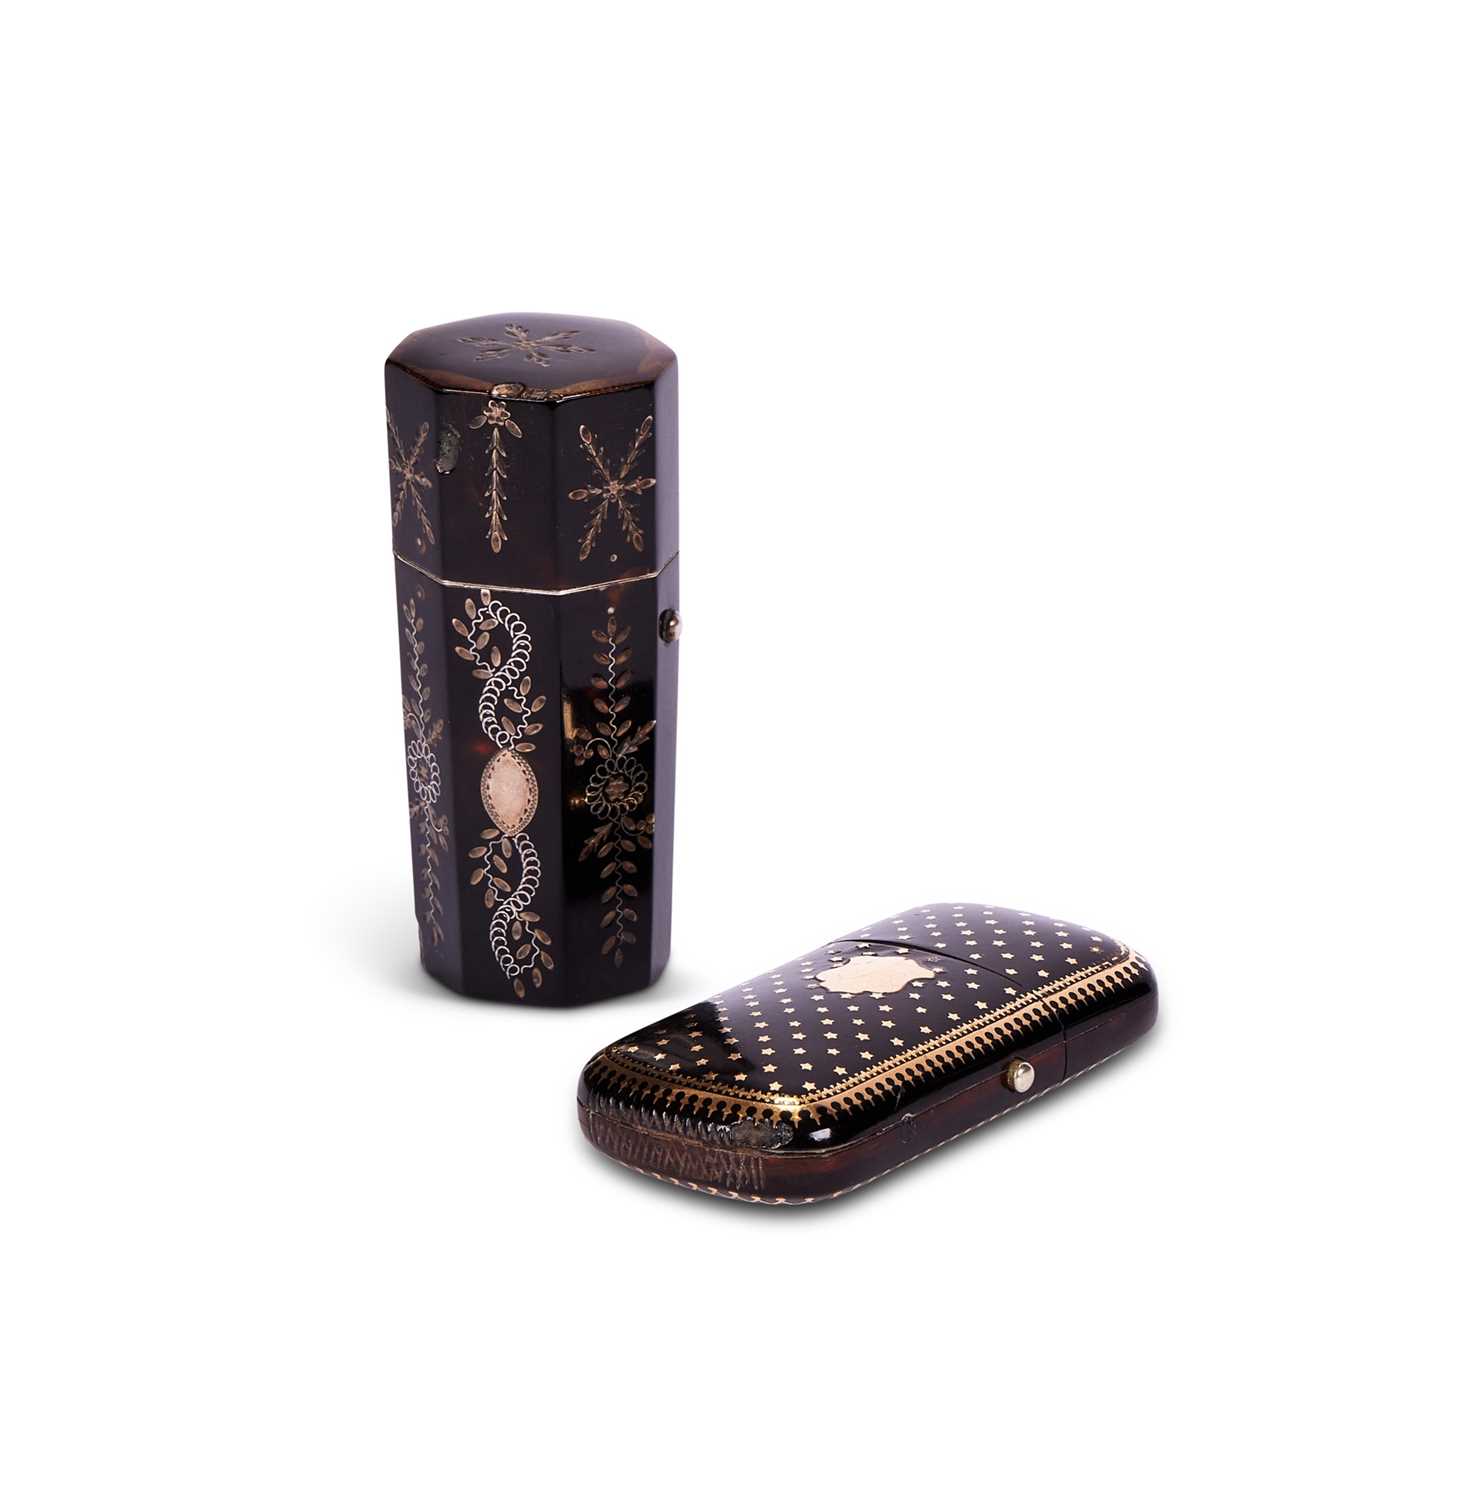 TWO 18TH CENTURY TORTOISESHELL AND SILVER PIQUE INLAID ETUI CASES